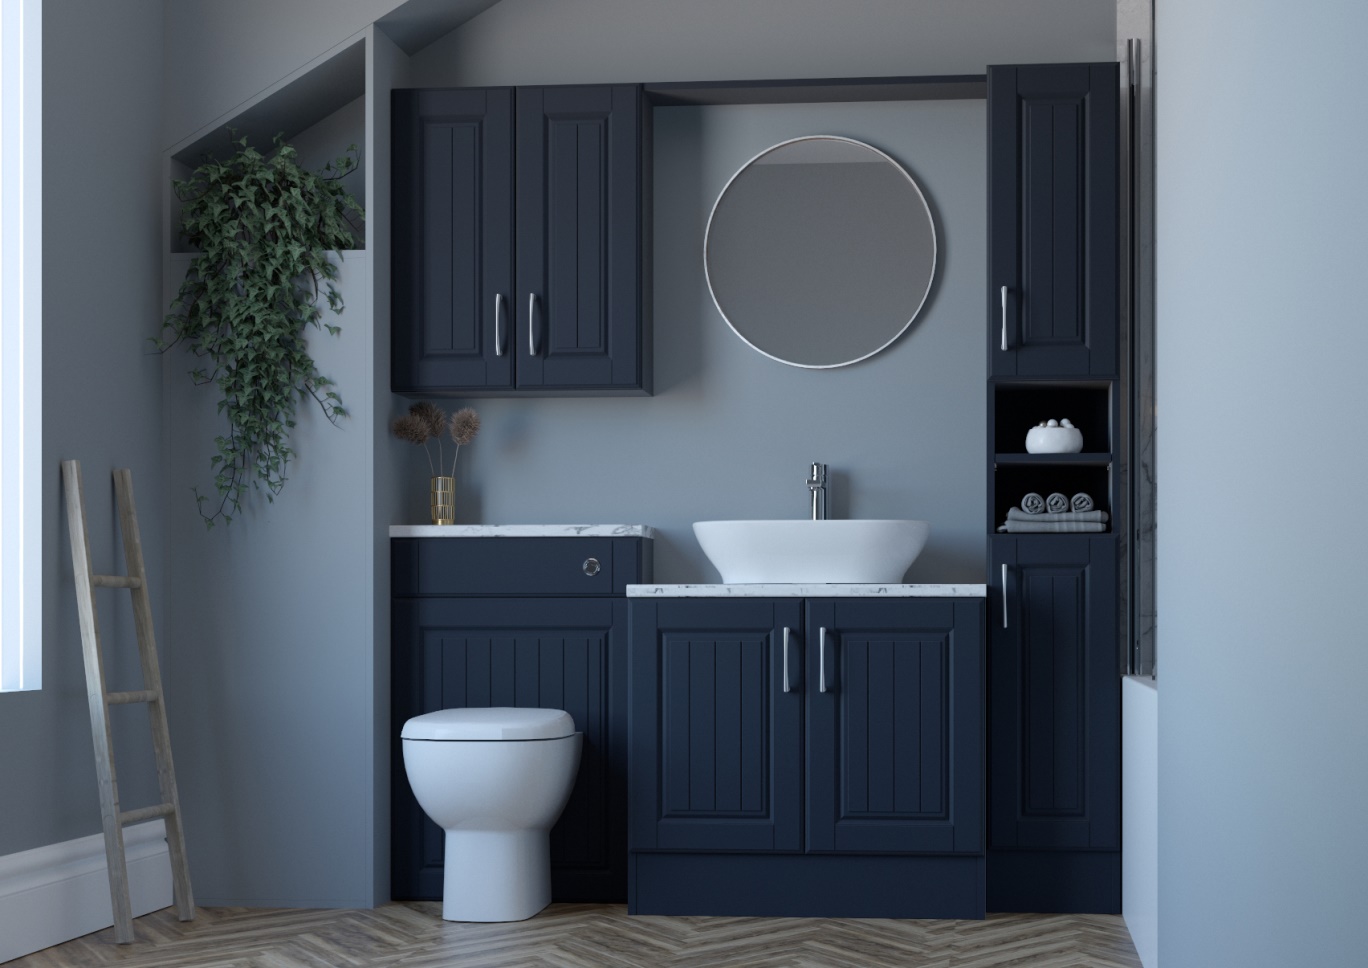 Instantly Update the Design of a Bathroom by Replacing Vanity Units